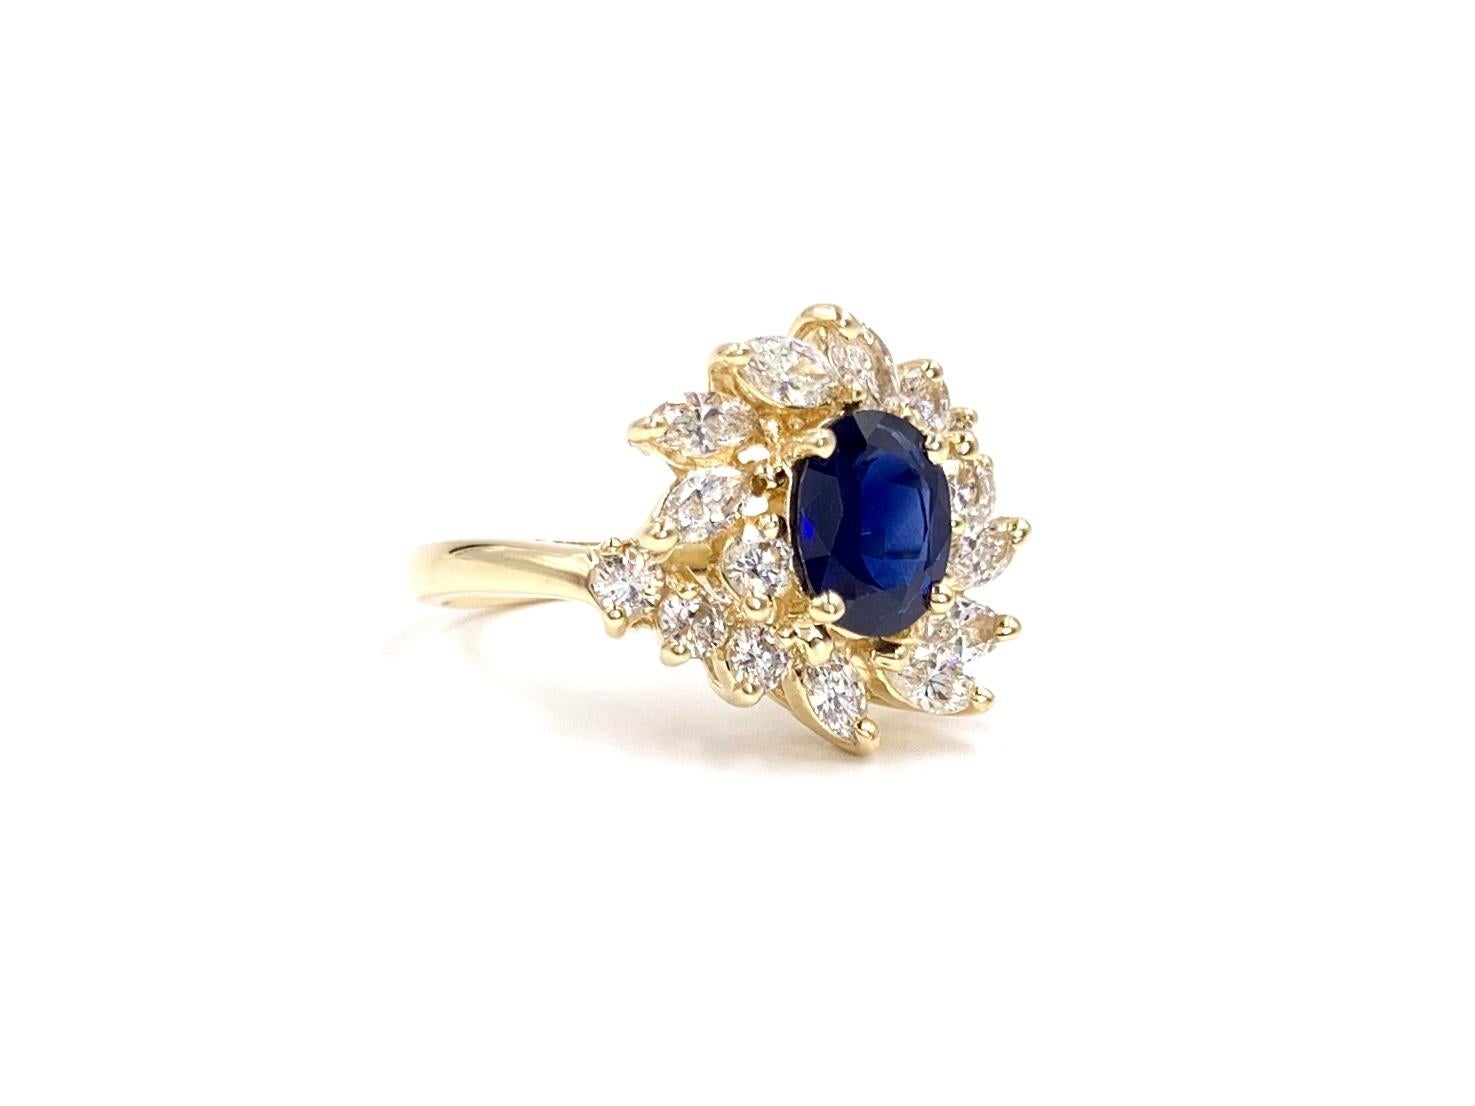 A truly exquisite find. This 14 karat yellow gold sparkling piece features an oval deep blue sapphire surrounded by high quality marquise and round brilliant white diamonds. Blue sapphire measures 8mm x 6.3mm at approximately 1.25 carats.